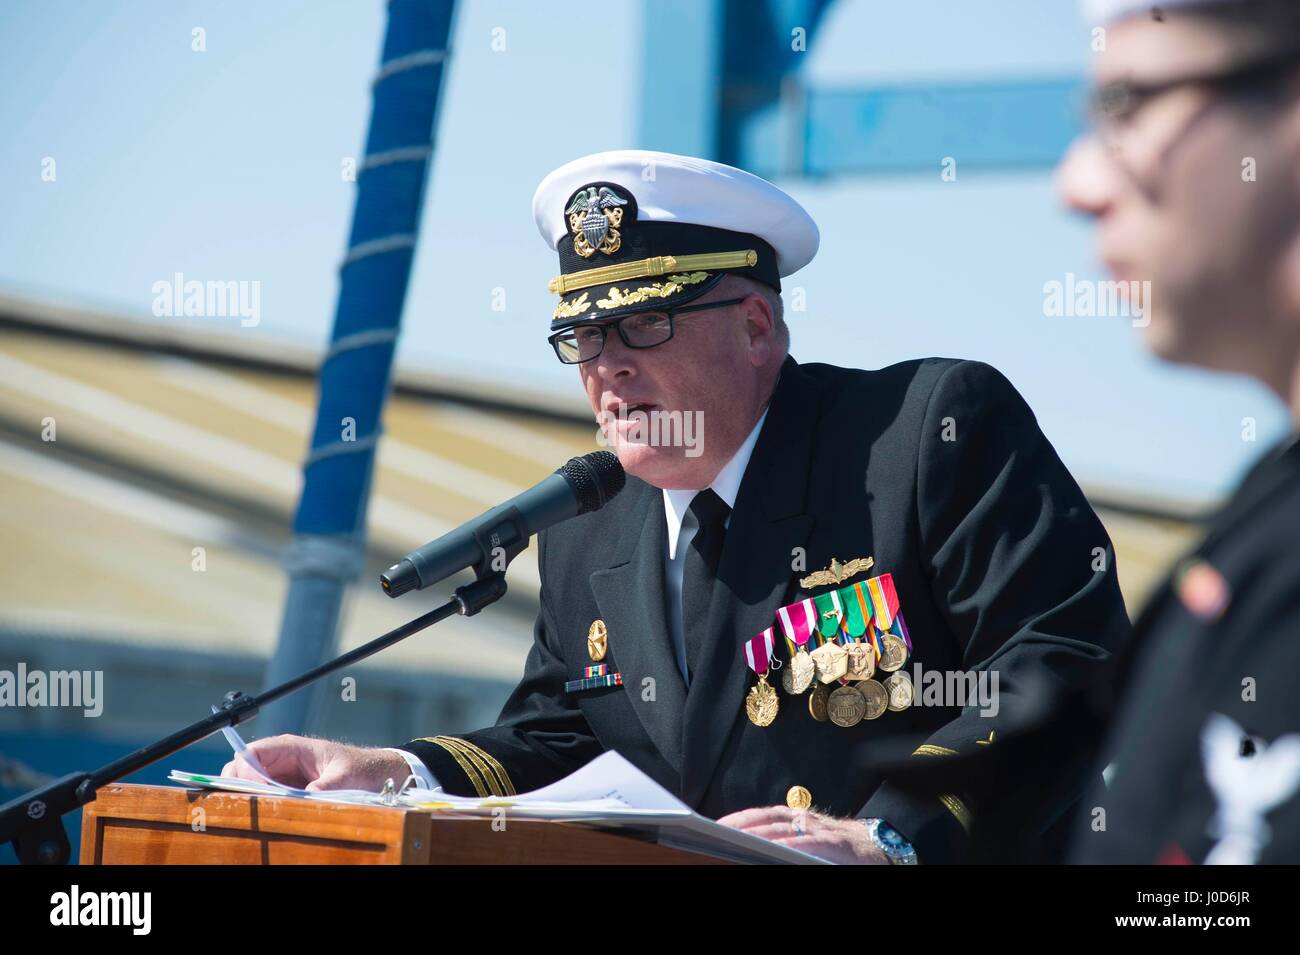 Larnaca, Cyprus. 11th Apr, 2017. U.S. Navy Cmdr. Russell Caldwell speaks during a routine change of command ceremony aboard USS Ross April 11, 2017 in Larnaca, Cyprus. Caldwell, led the ships missile assault on Syria on April 7th, turned over the helm to Cmdr. Bryan Gallo. Credit: Planetpix/Alamy Live News Stock Photo